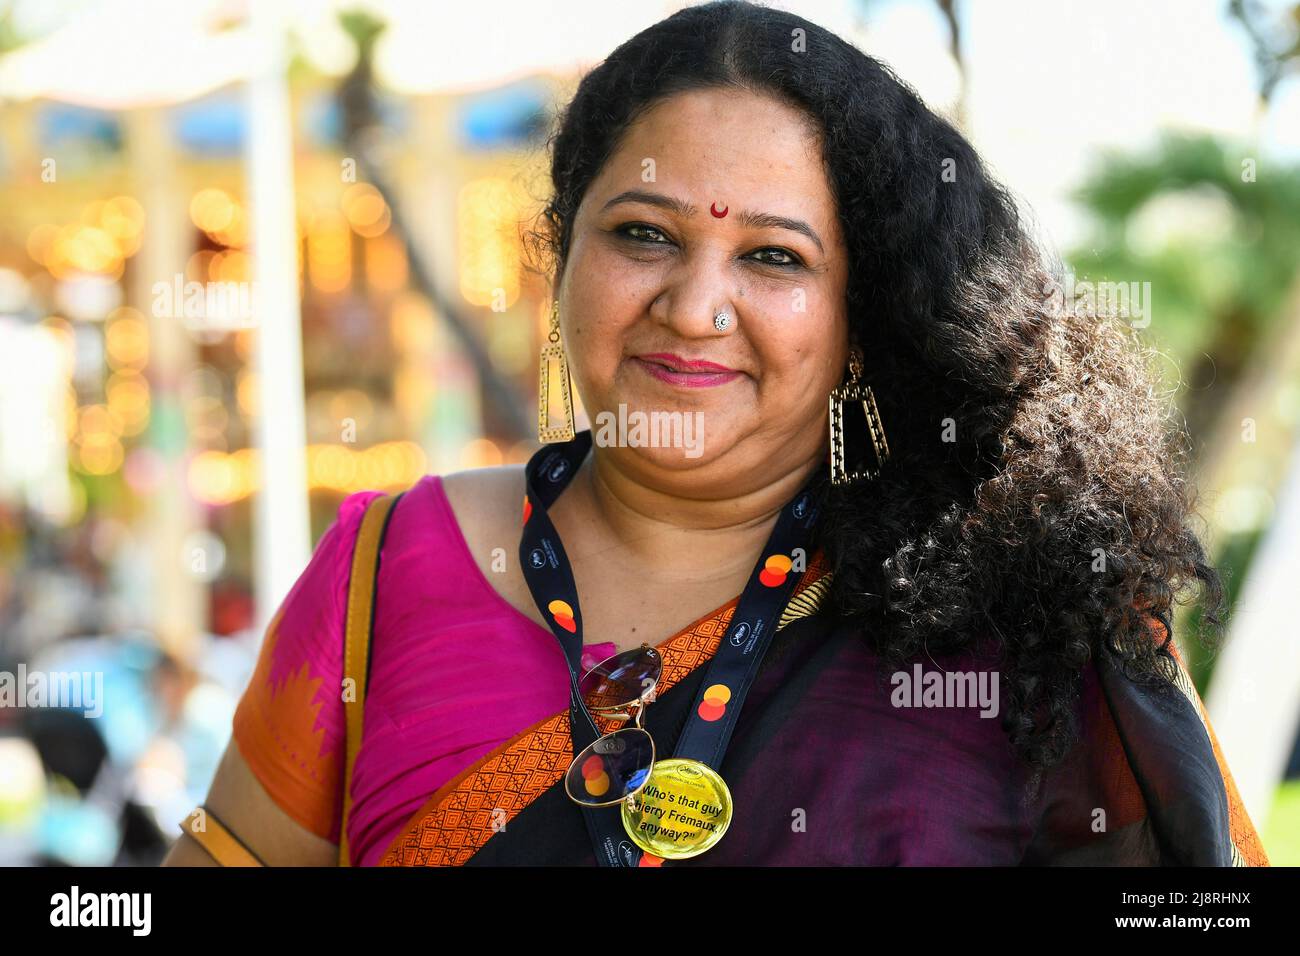 The 75th Cannes Film Festival - Cannes, France, May 18, 2022. Director Rasika Agashe is seen on the Croisette as India is the Country of Honour at Marche du Film (Film Market). REUTERS/Piroschka Van De Wouw Stock Photo